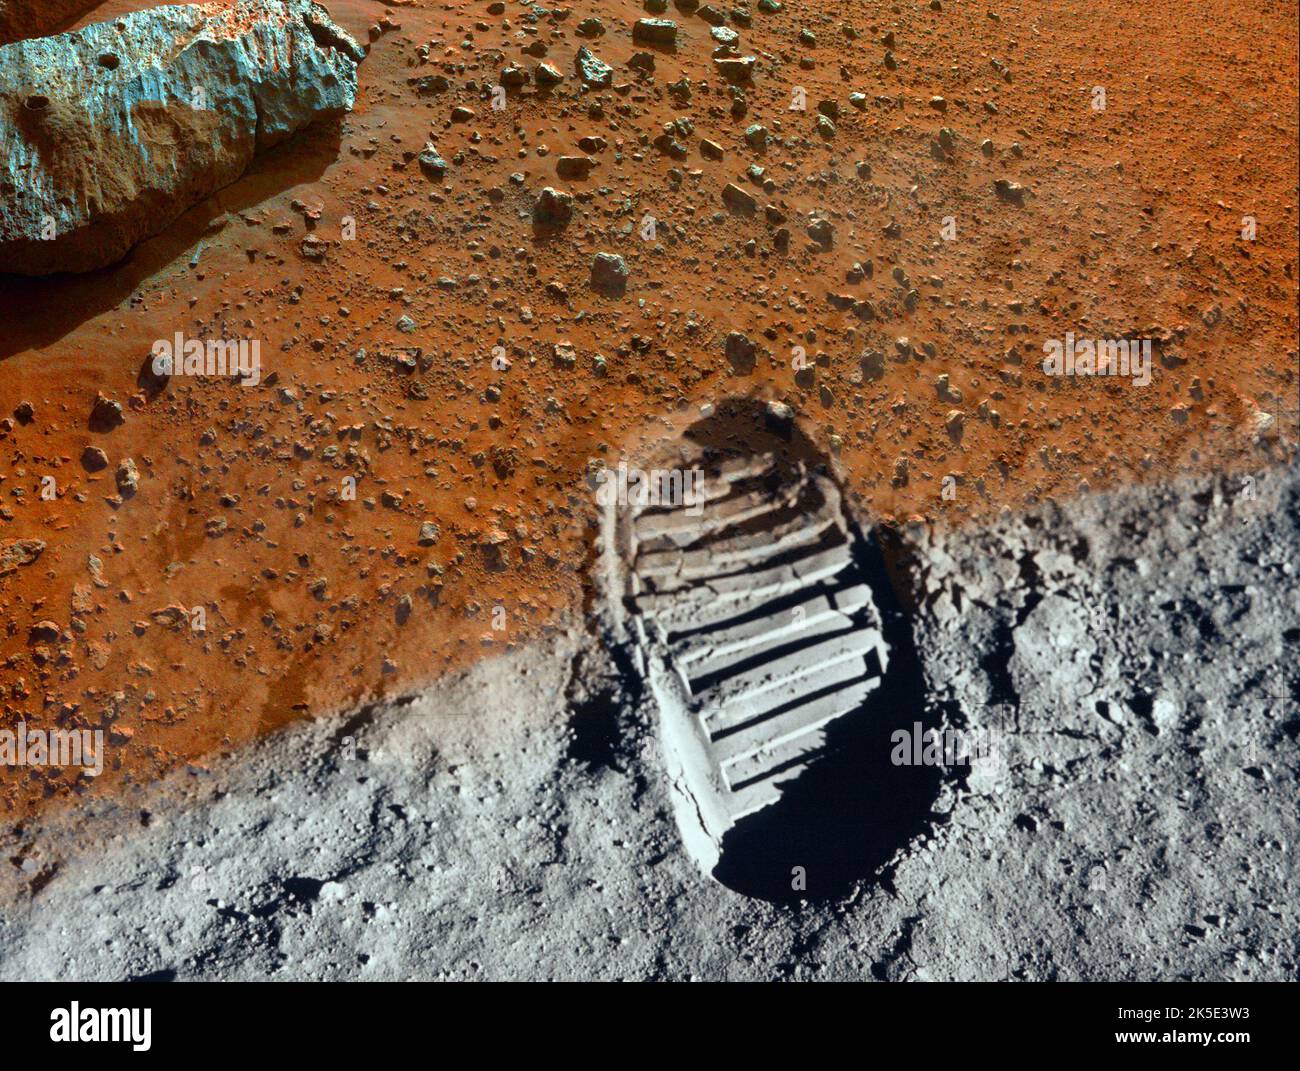 As NASA prepares for a return to the moon ahead of future journeys to mars... an astronaut (Buzz Aldrin)'s bootprint from the Apollo 11 moon landing blended with an image of martian soil.  A n original composite of original NASA images / credit NASA. Stock Photo